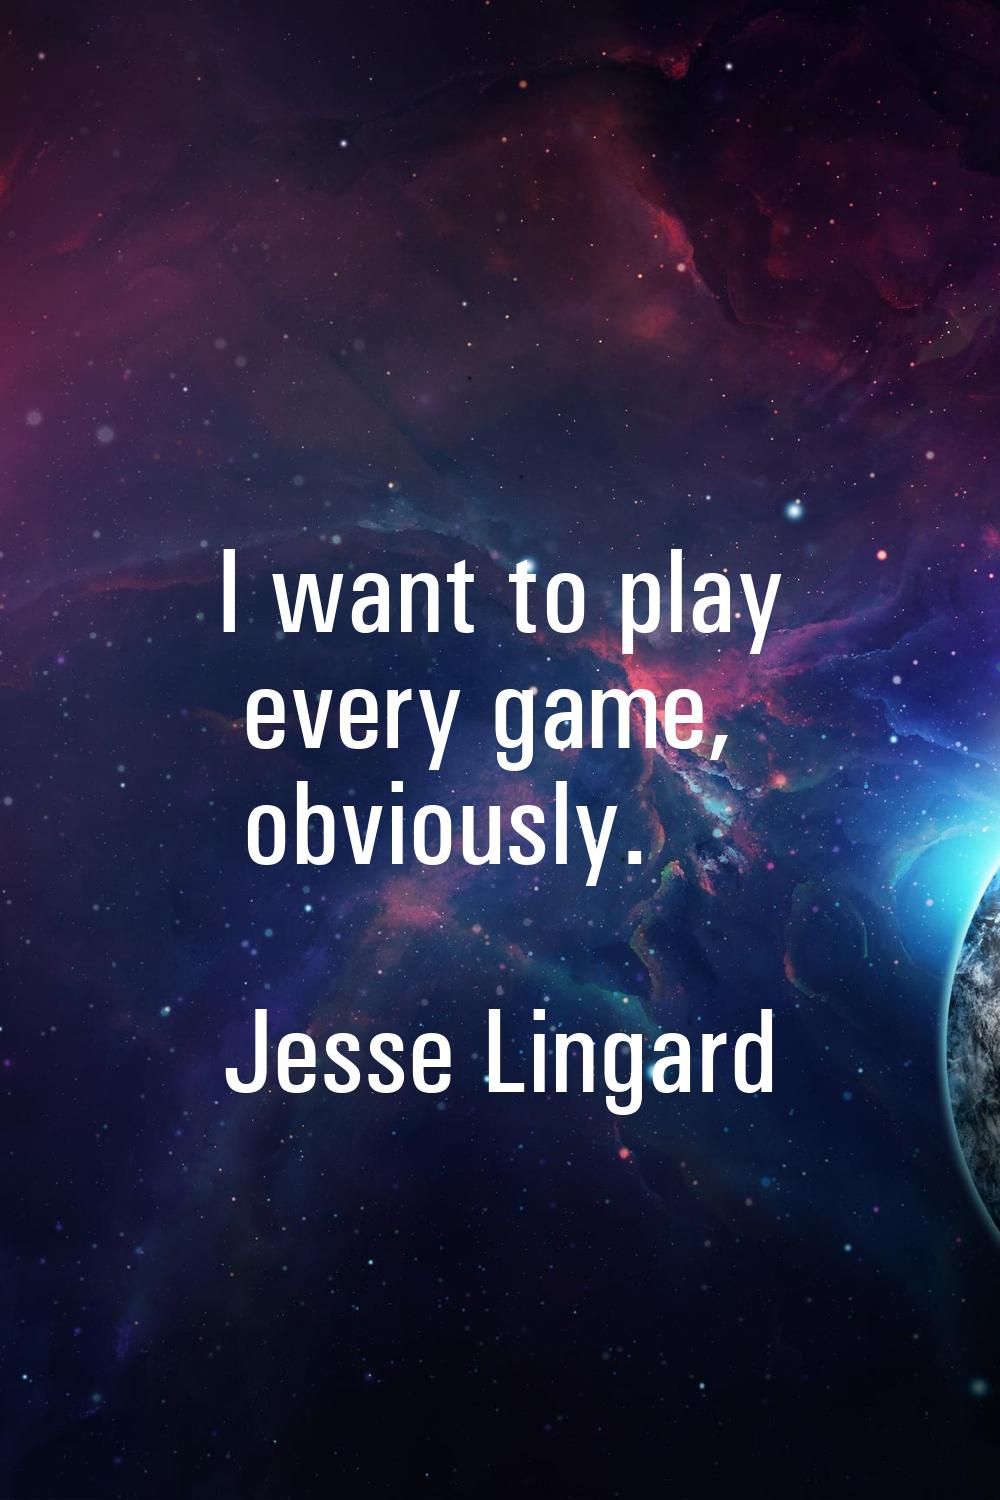 I want to play every game, obviously.